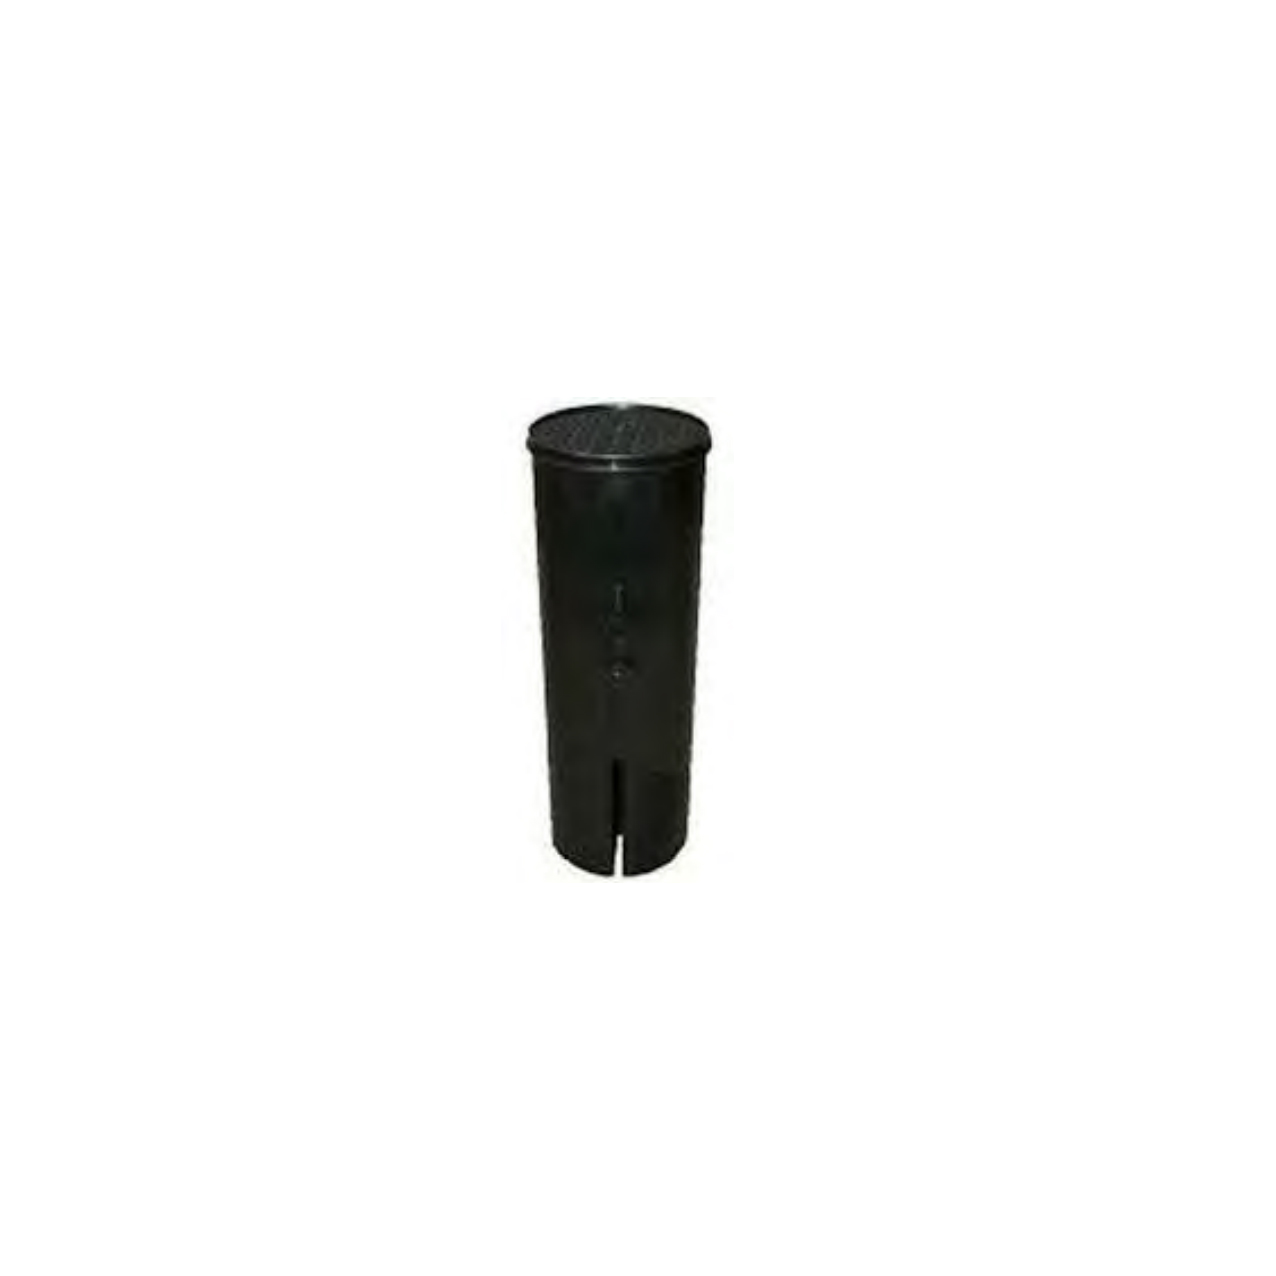 PPE Clemco Type Replacement Filter Cartridge